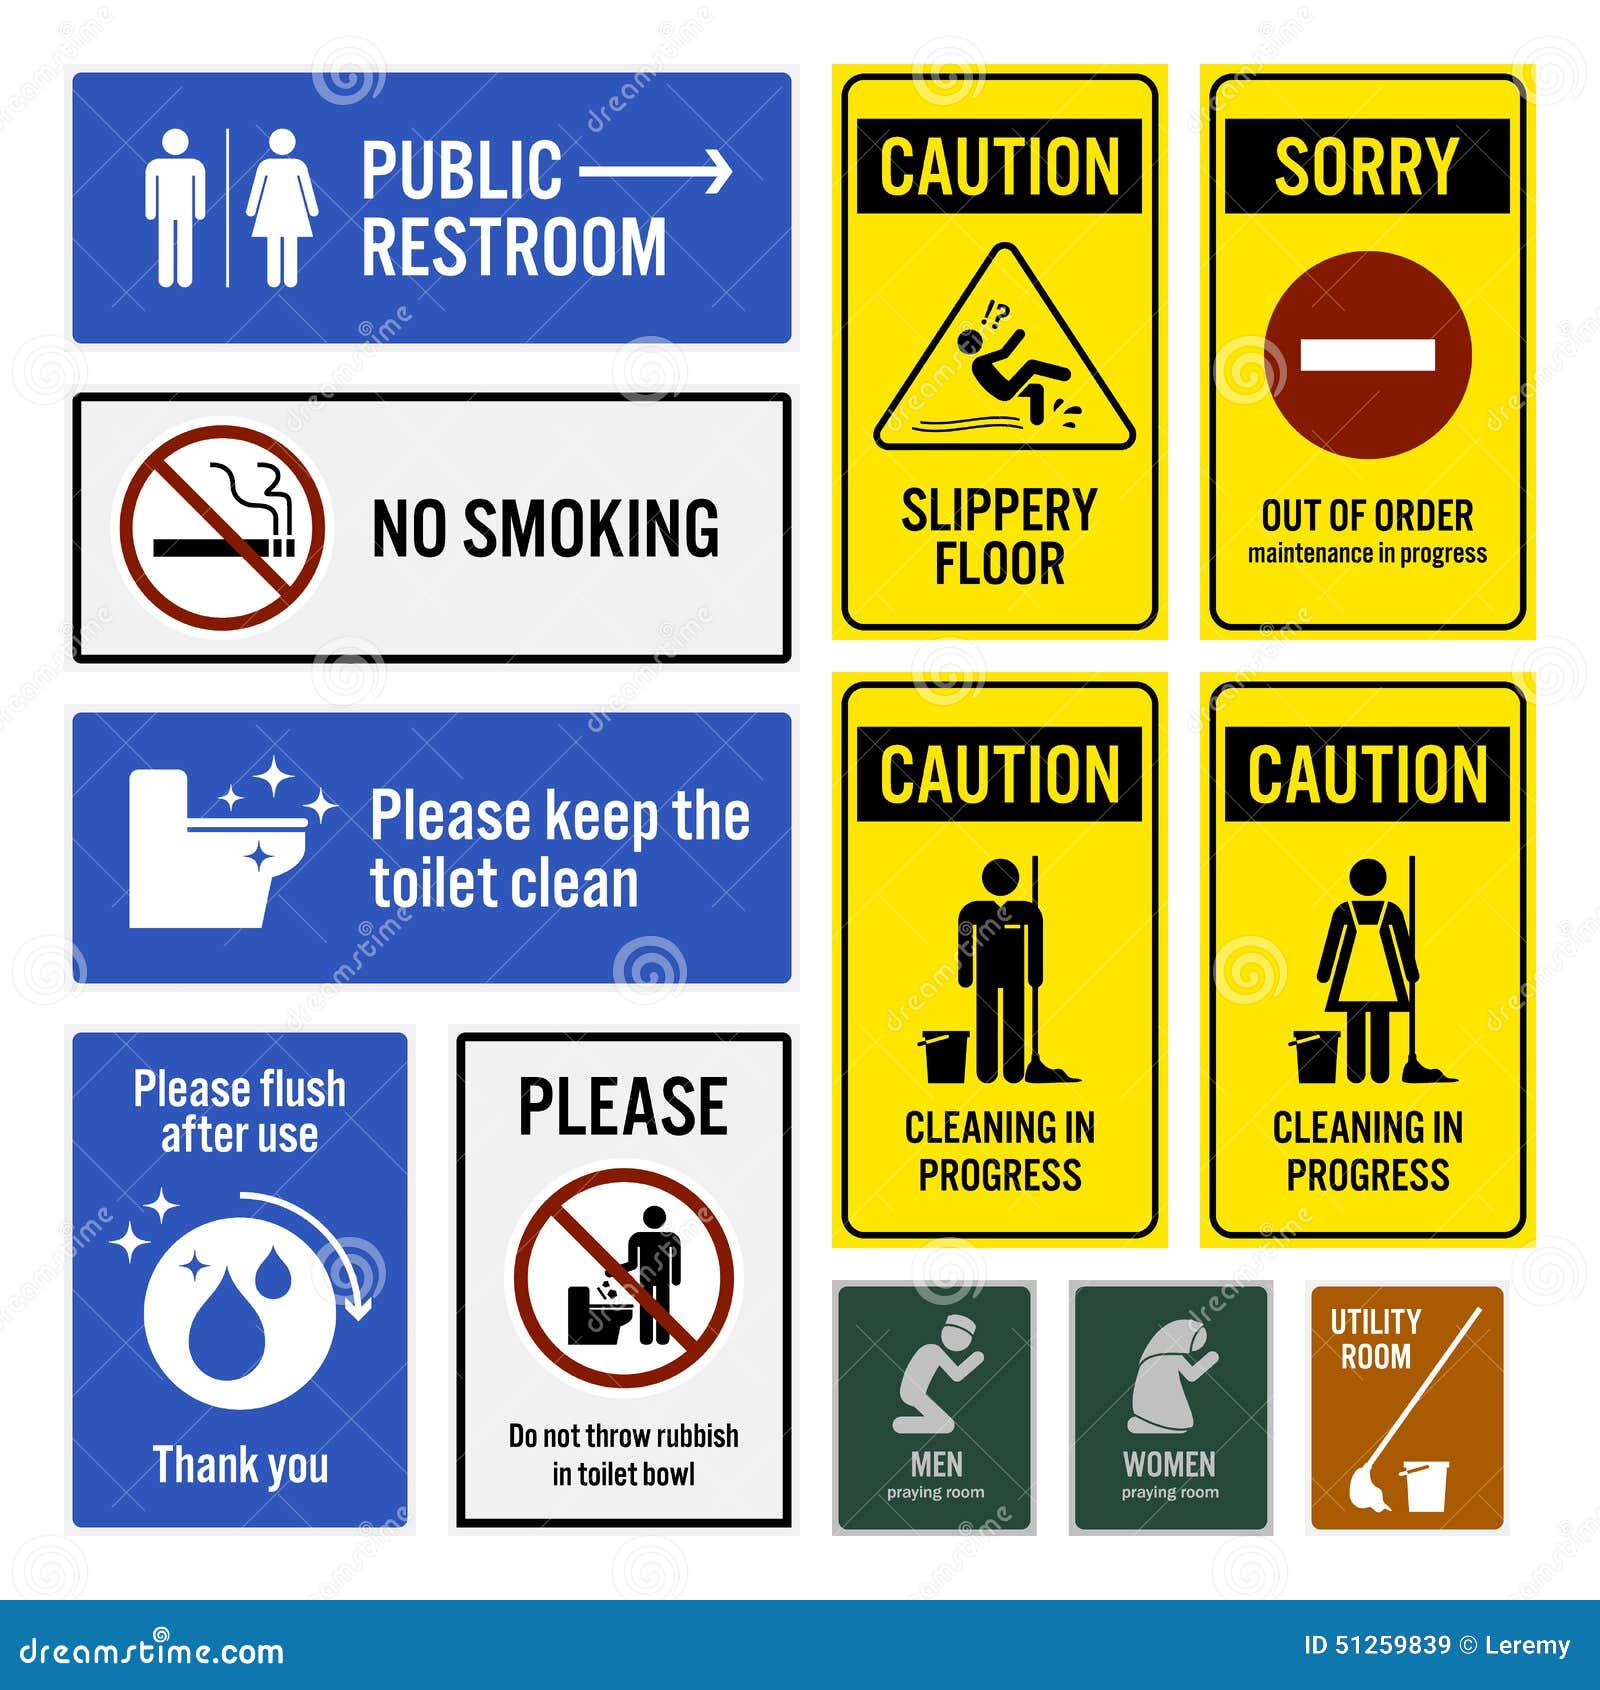 PLEASE FLUSH TOILET AFTER USE A5/A4/A3 STICKER FOAMEX SITE SIGN SAFETY SIGN